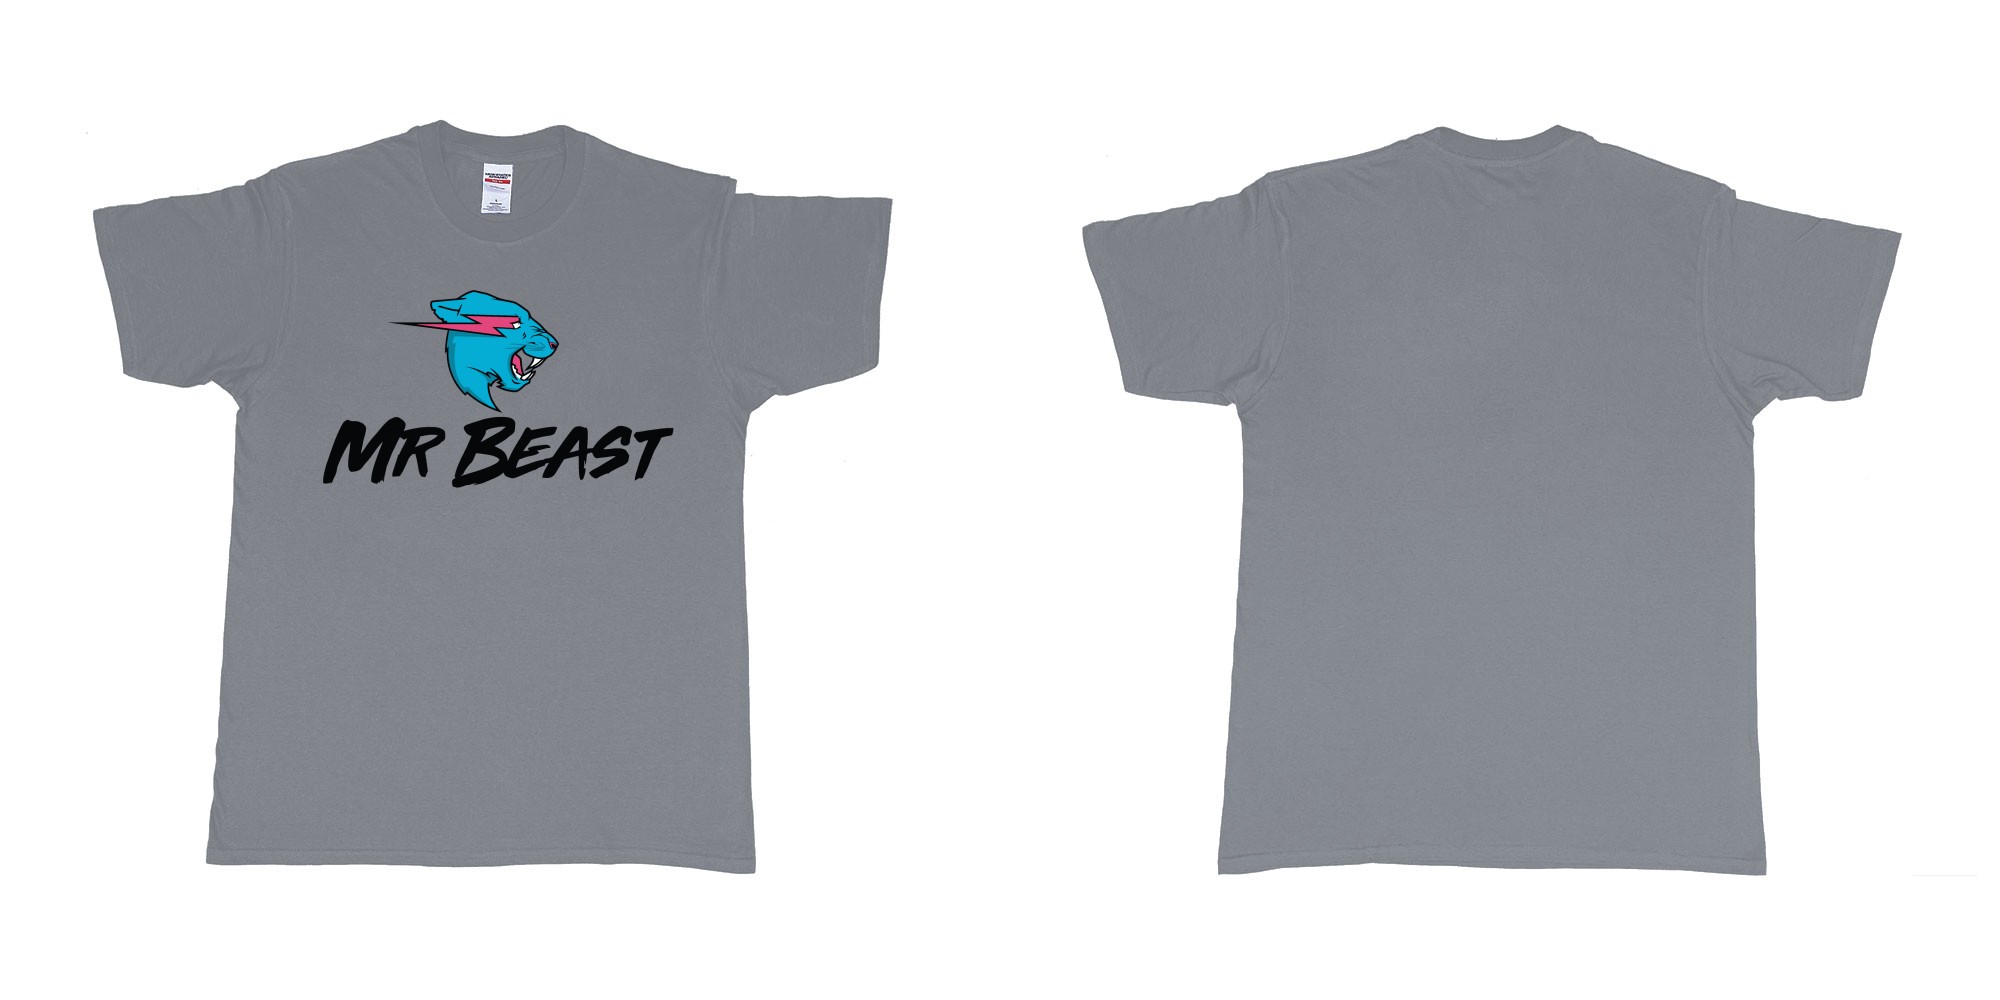 Custom tshirt design mr beast logo in fabric color misty choice your own text made in Bali by The Pirate Way